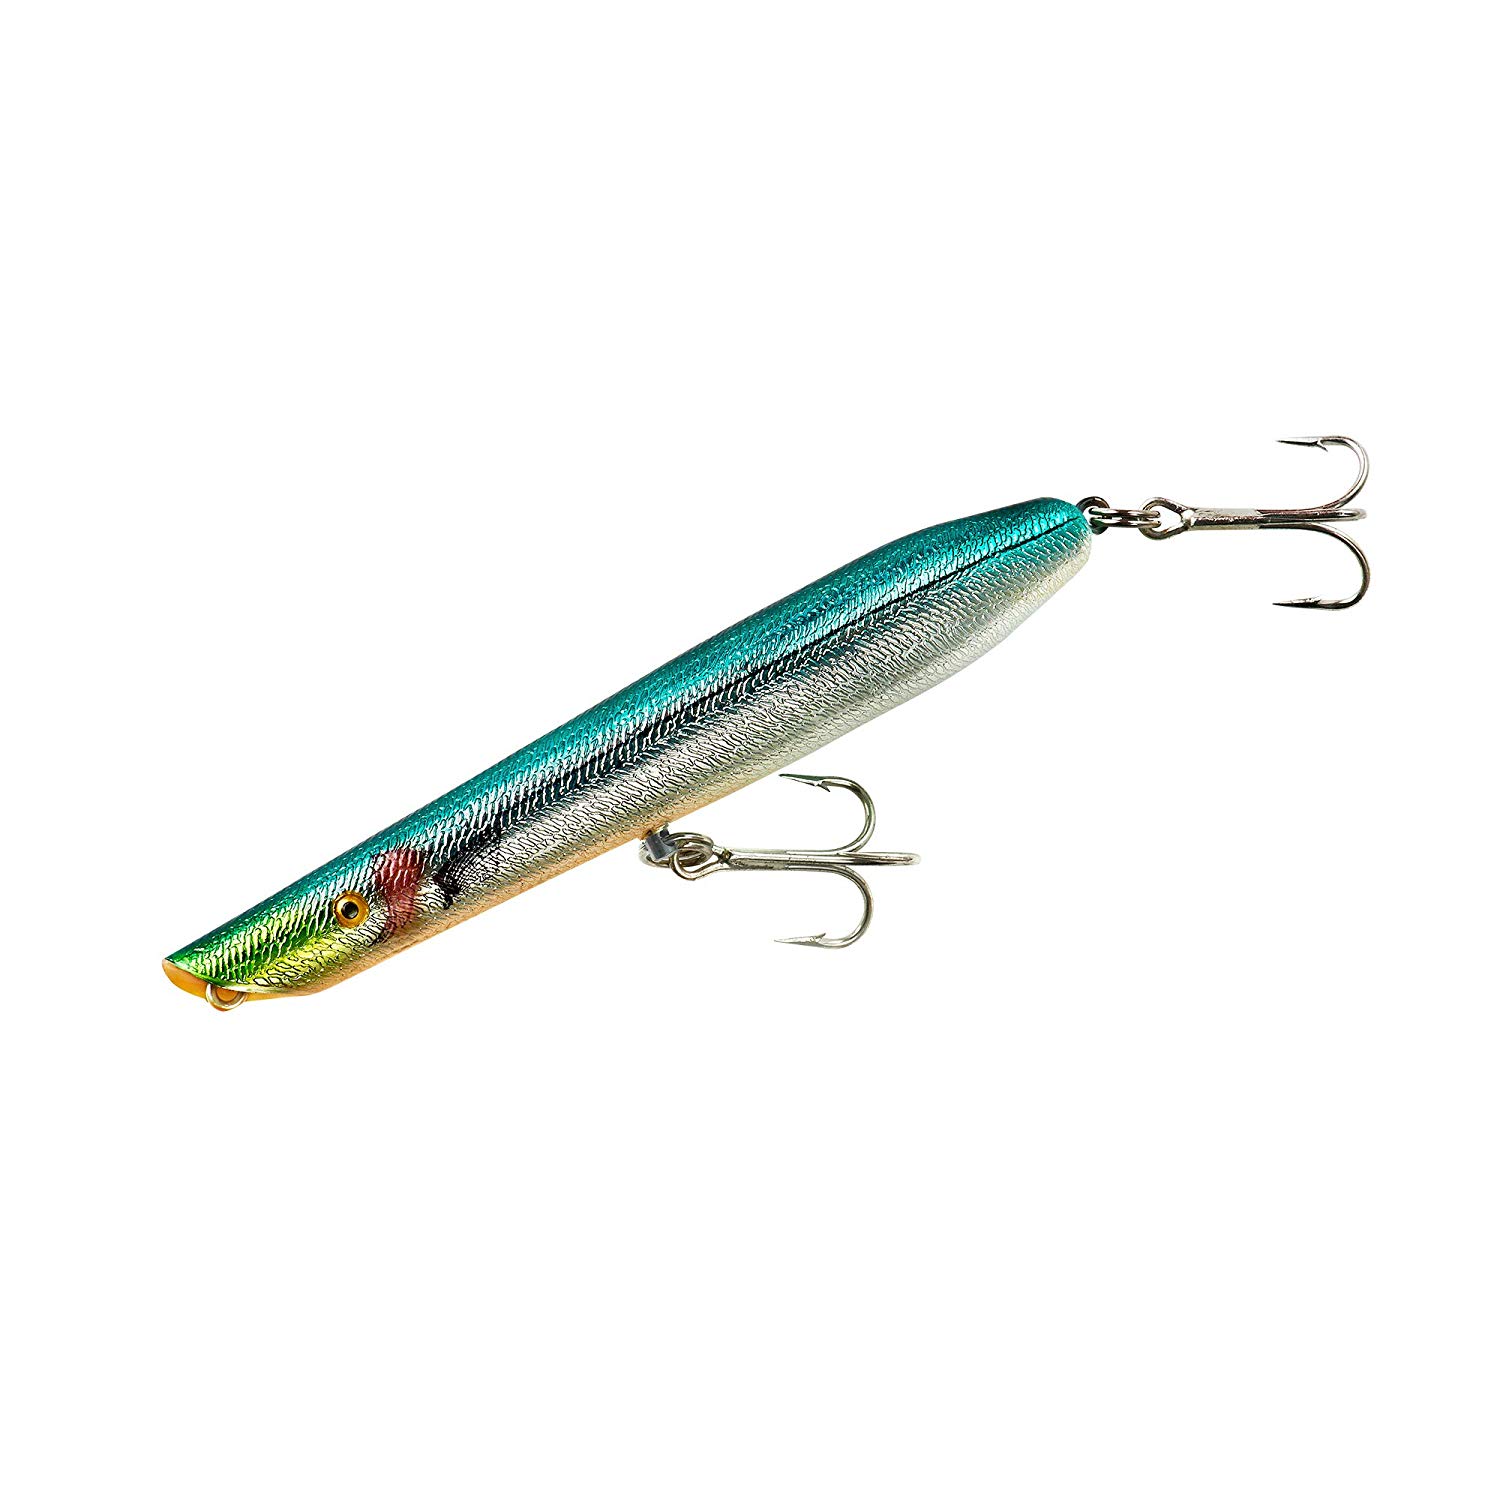 Cotton Cordell Pencil Popper Fishing Lure | Spinning | Saltwater | Bluefish | Sea Bass | Giant Trevally | Leerfish | Striped Bass